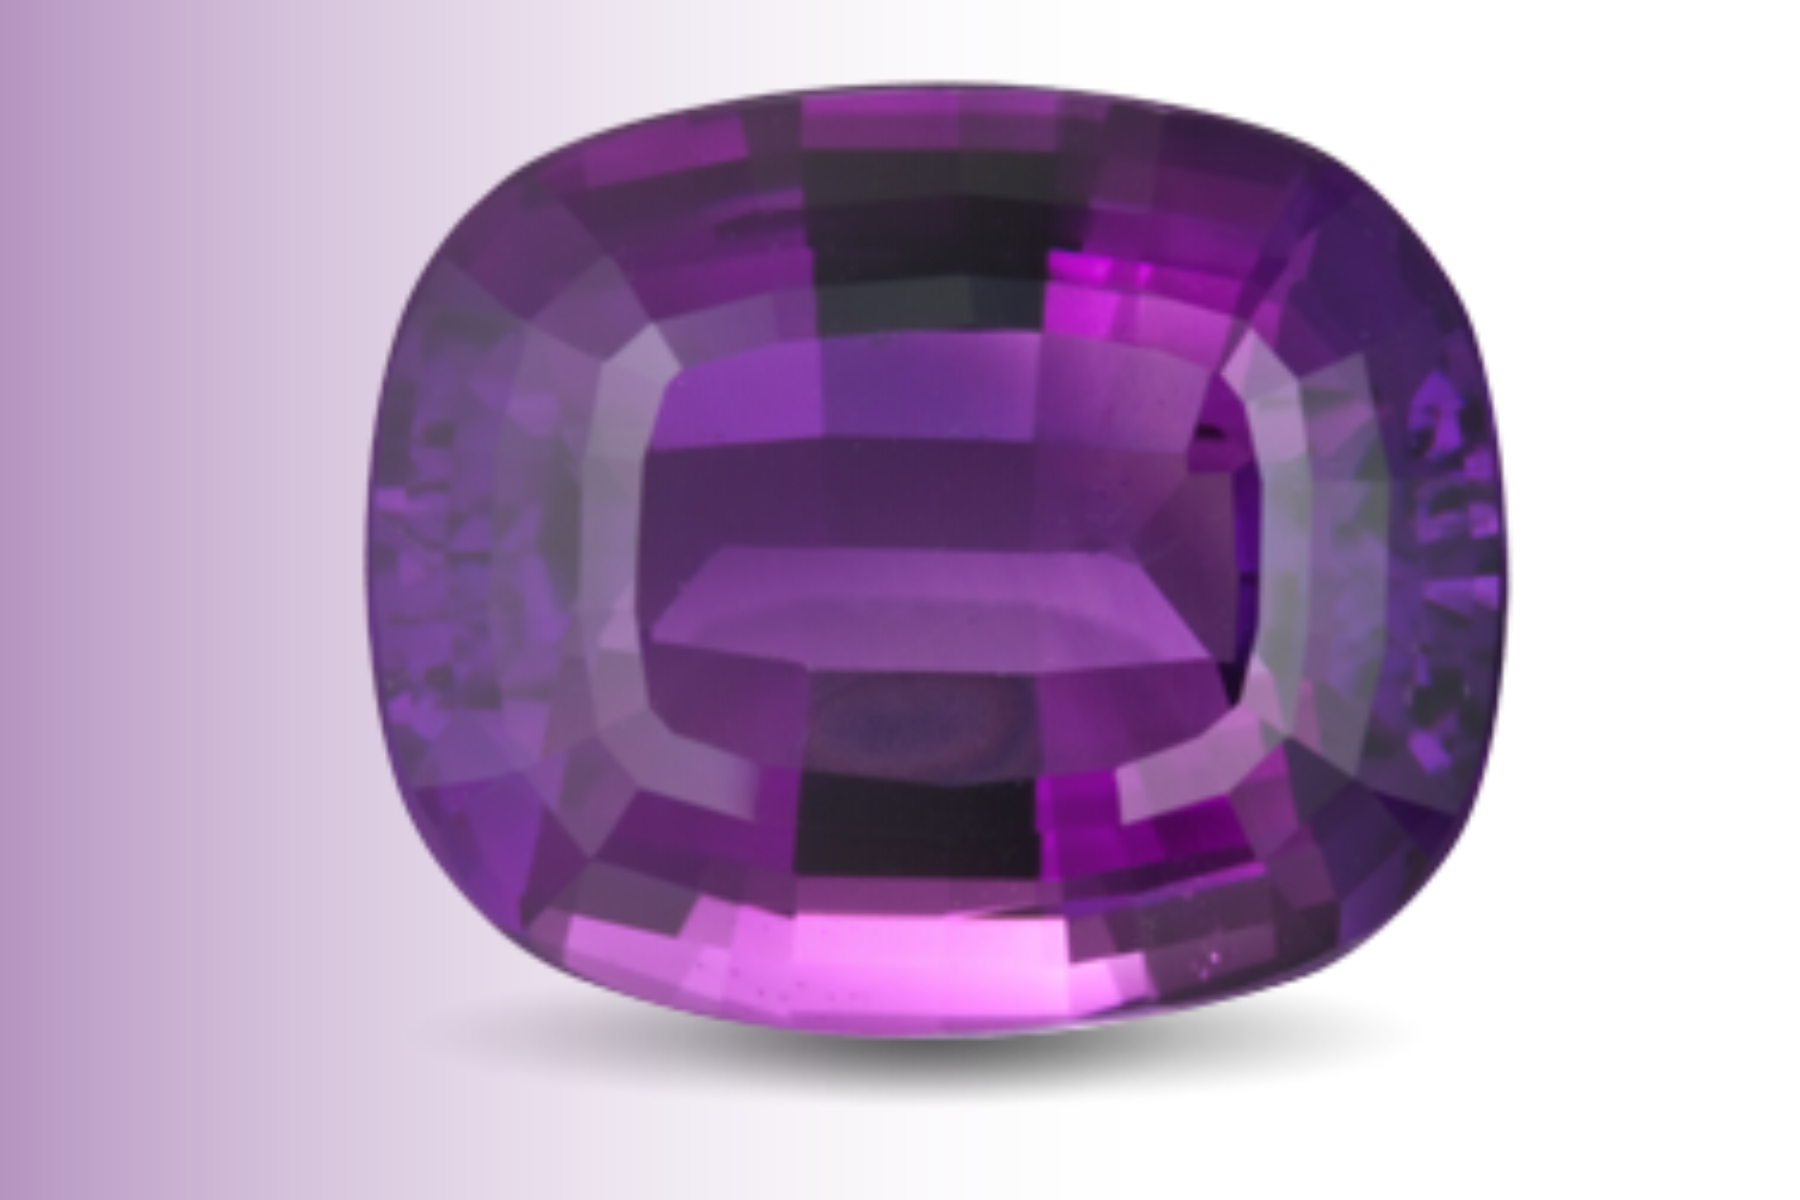 An amethyst cube with rounded corners